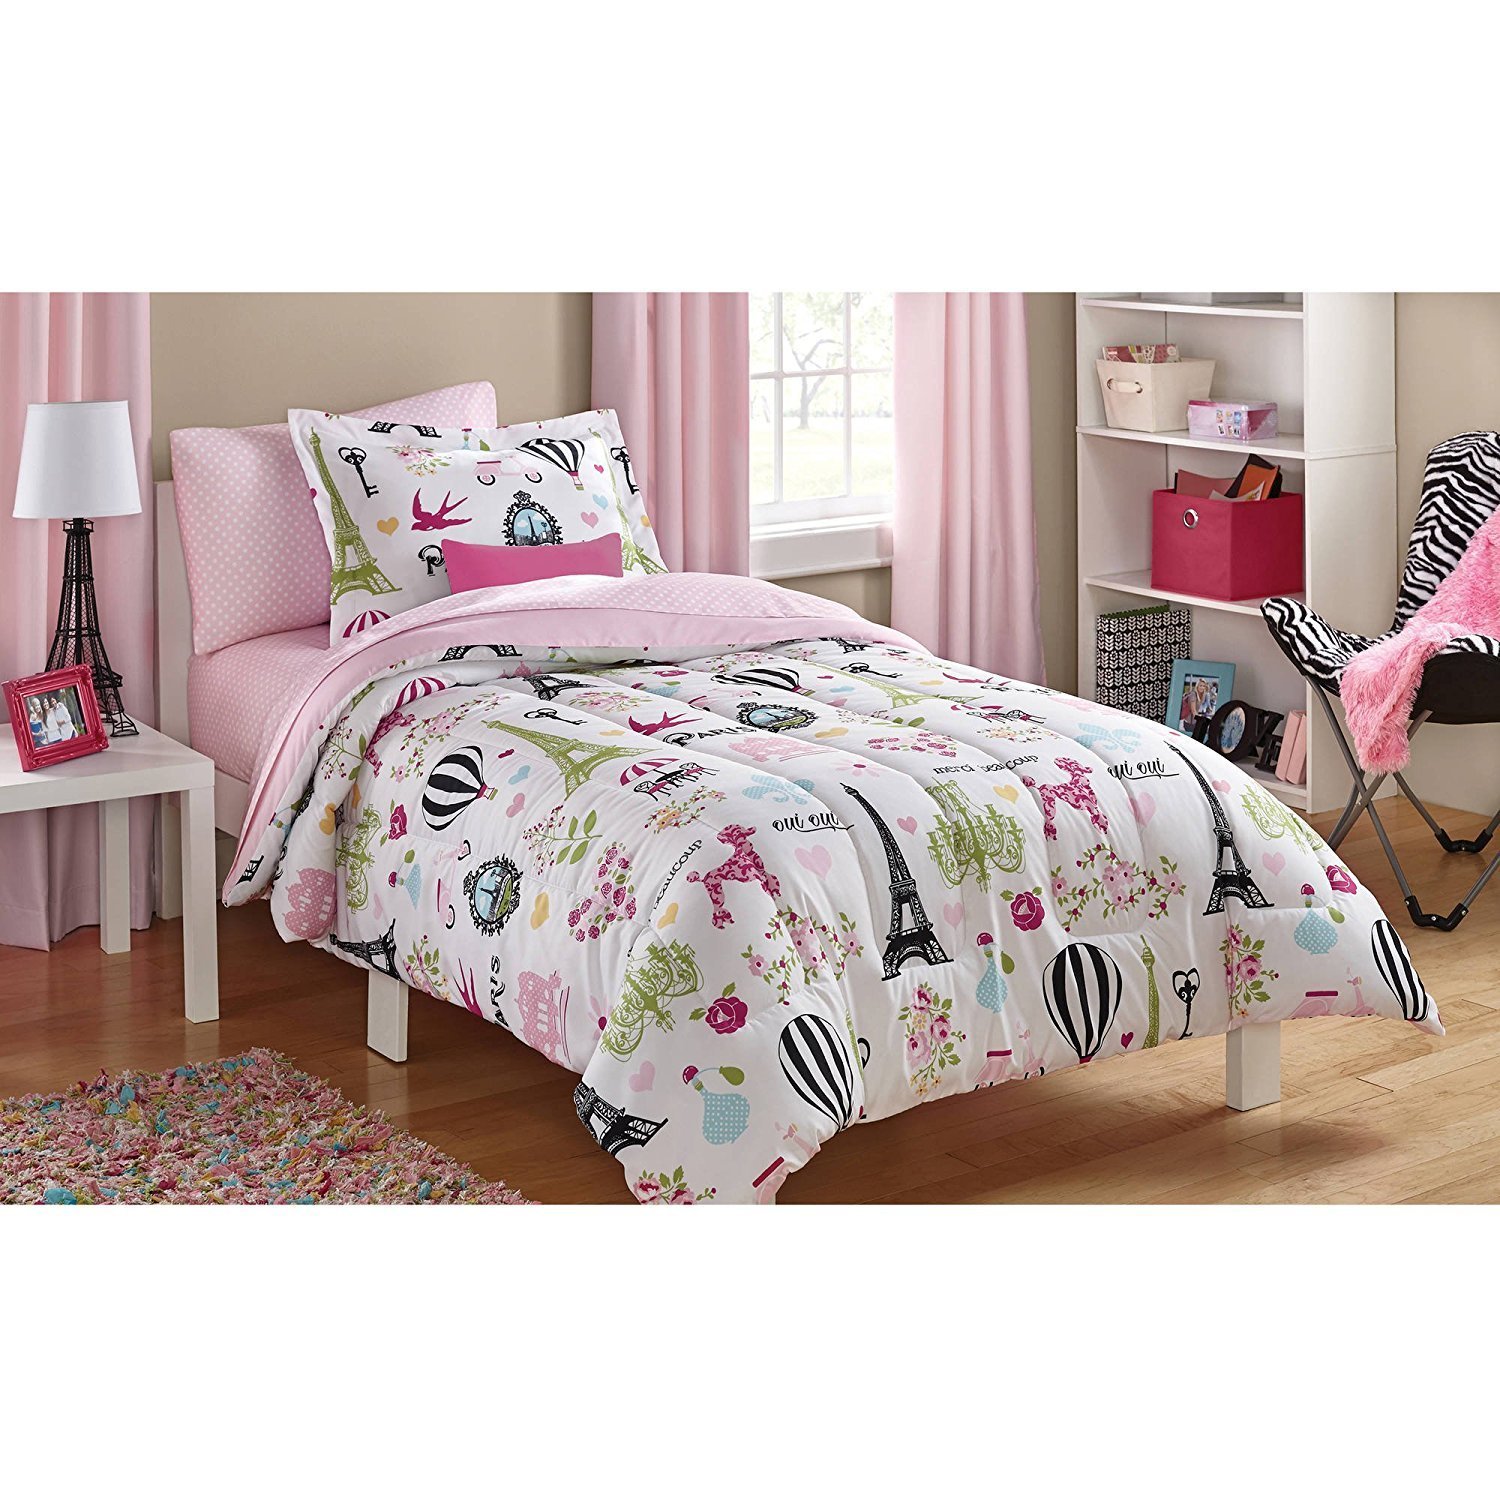 I Love Paris, Girls Twin Pink White and Black Cute Parisian Bedding Set (4 Piece Bed in a Bag)